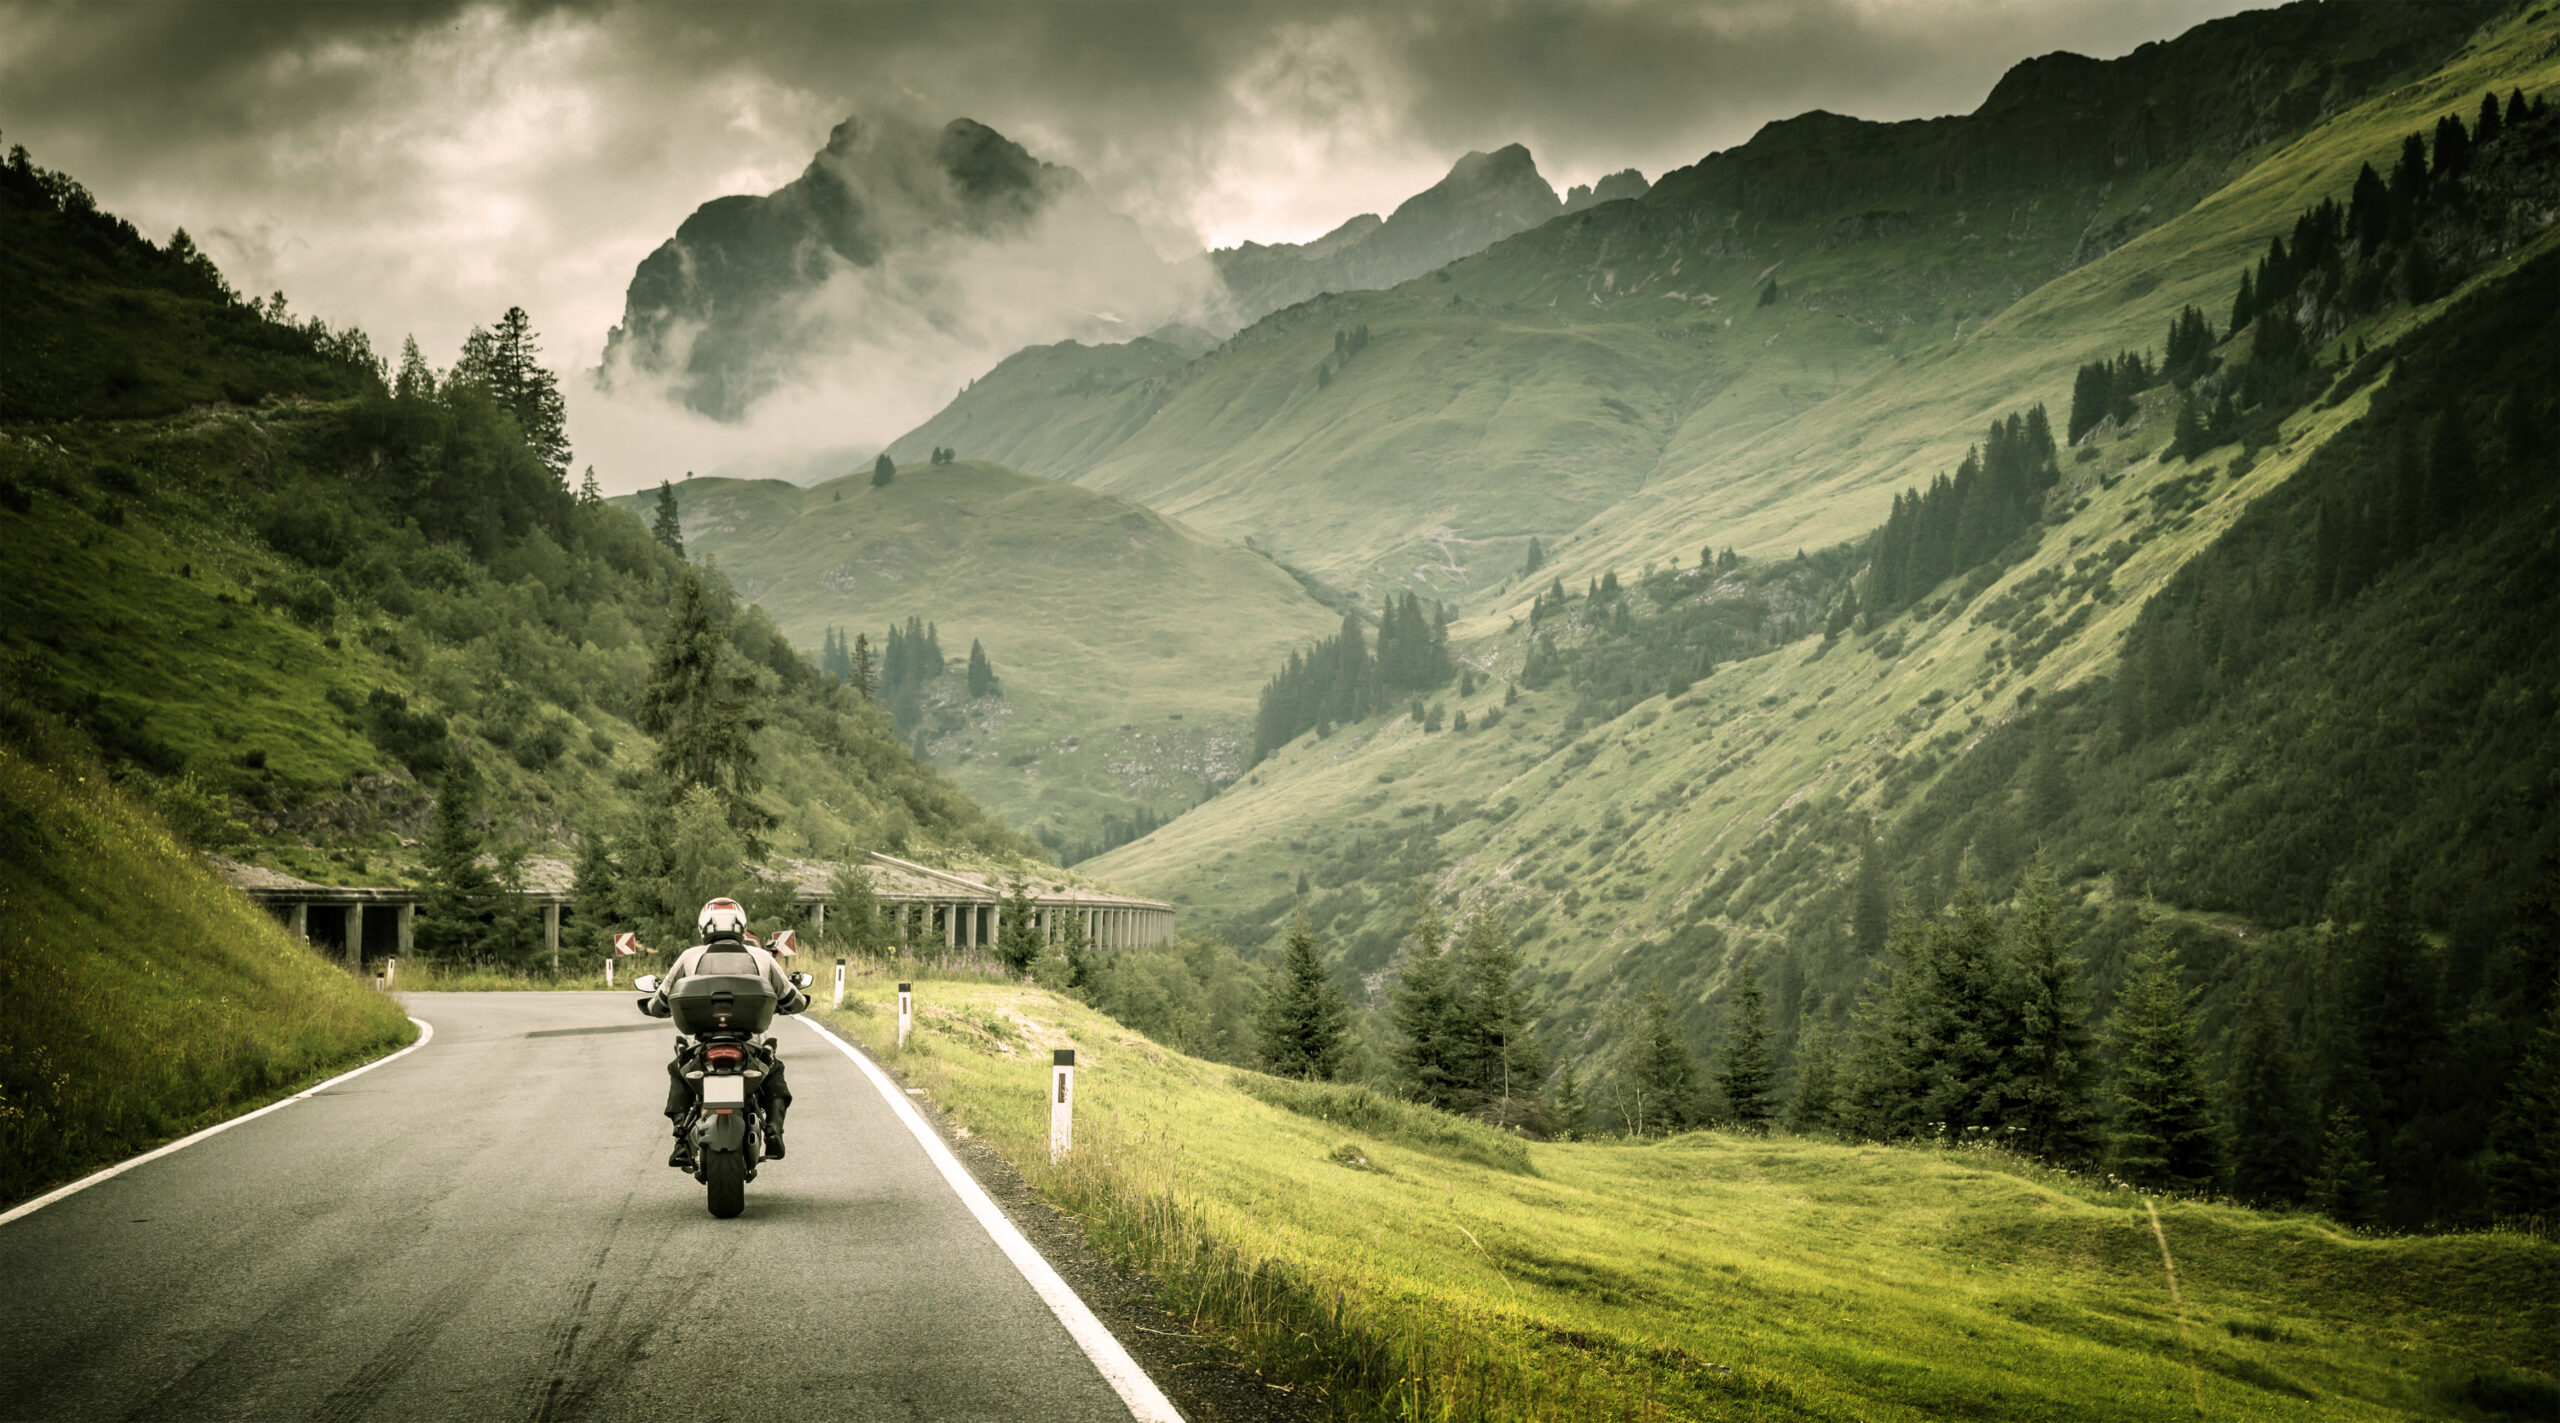 Motorcyclist on a mountainous highway, cold overcast weather,